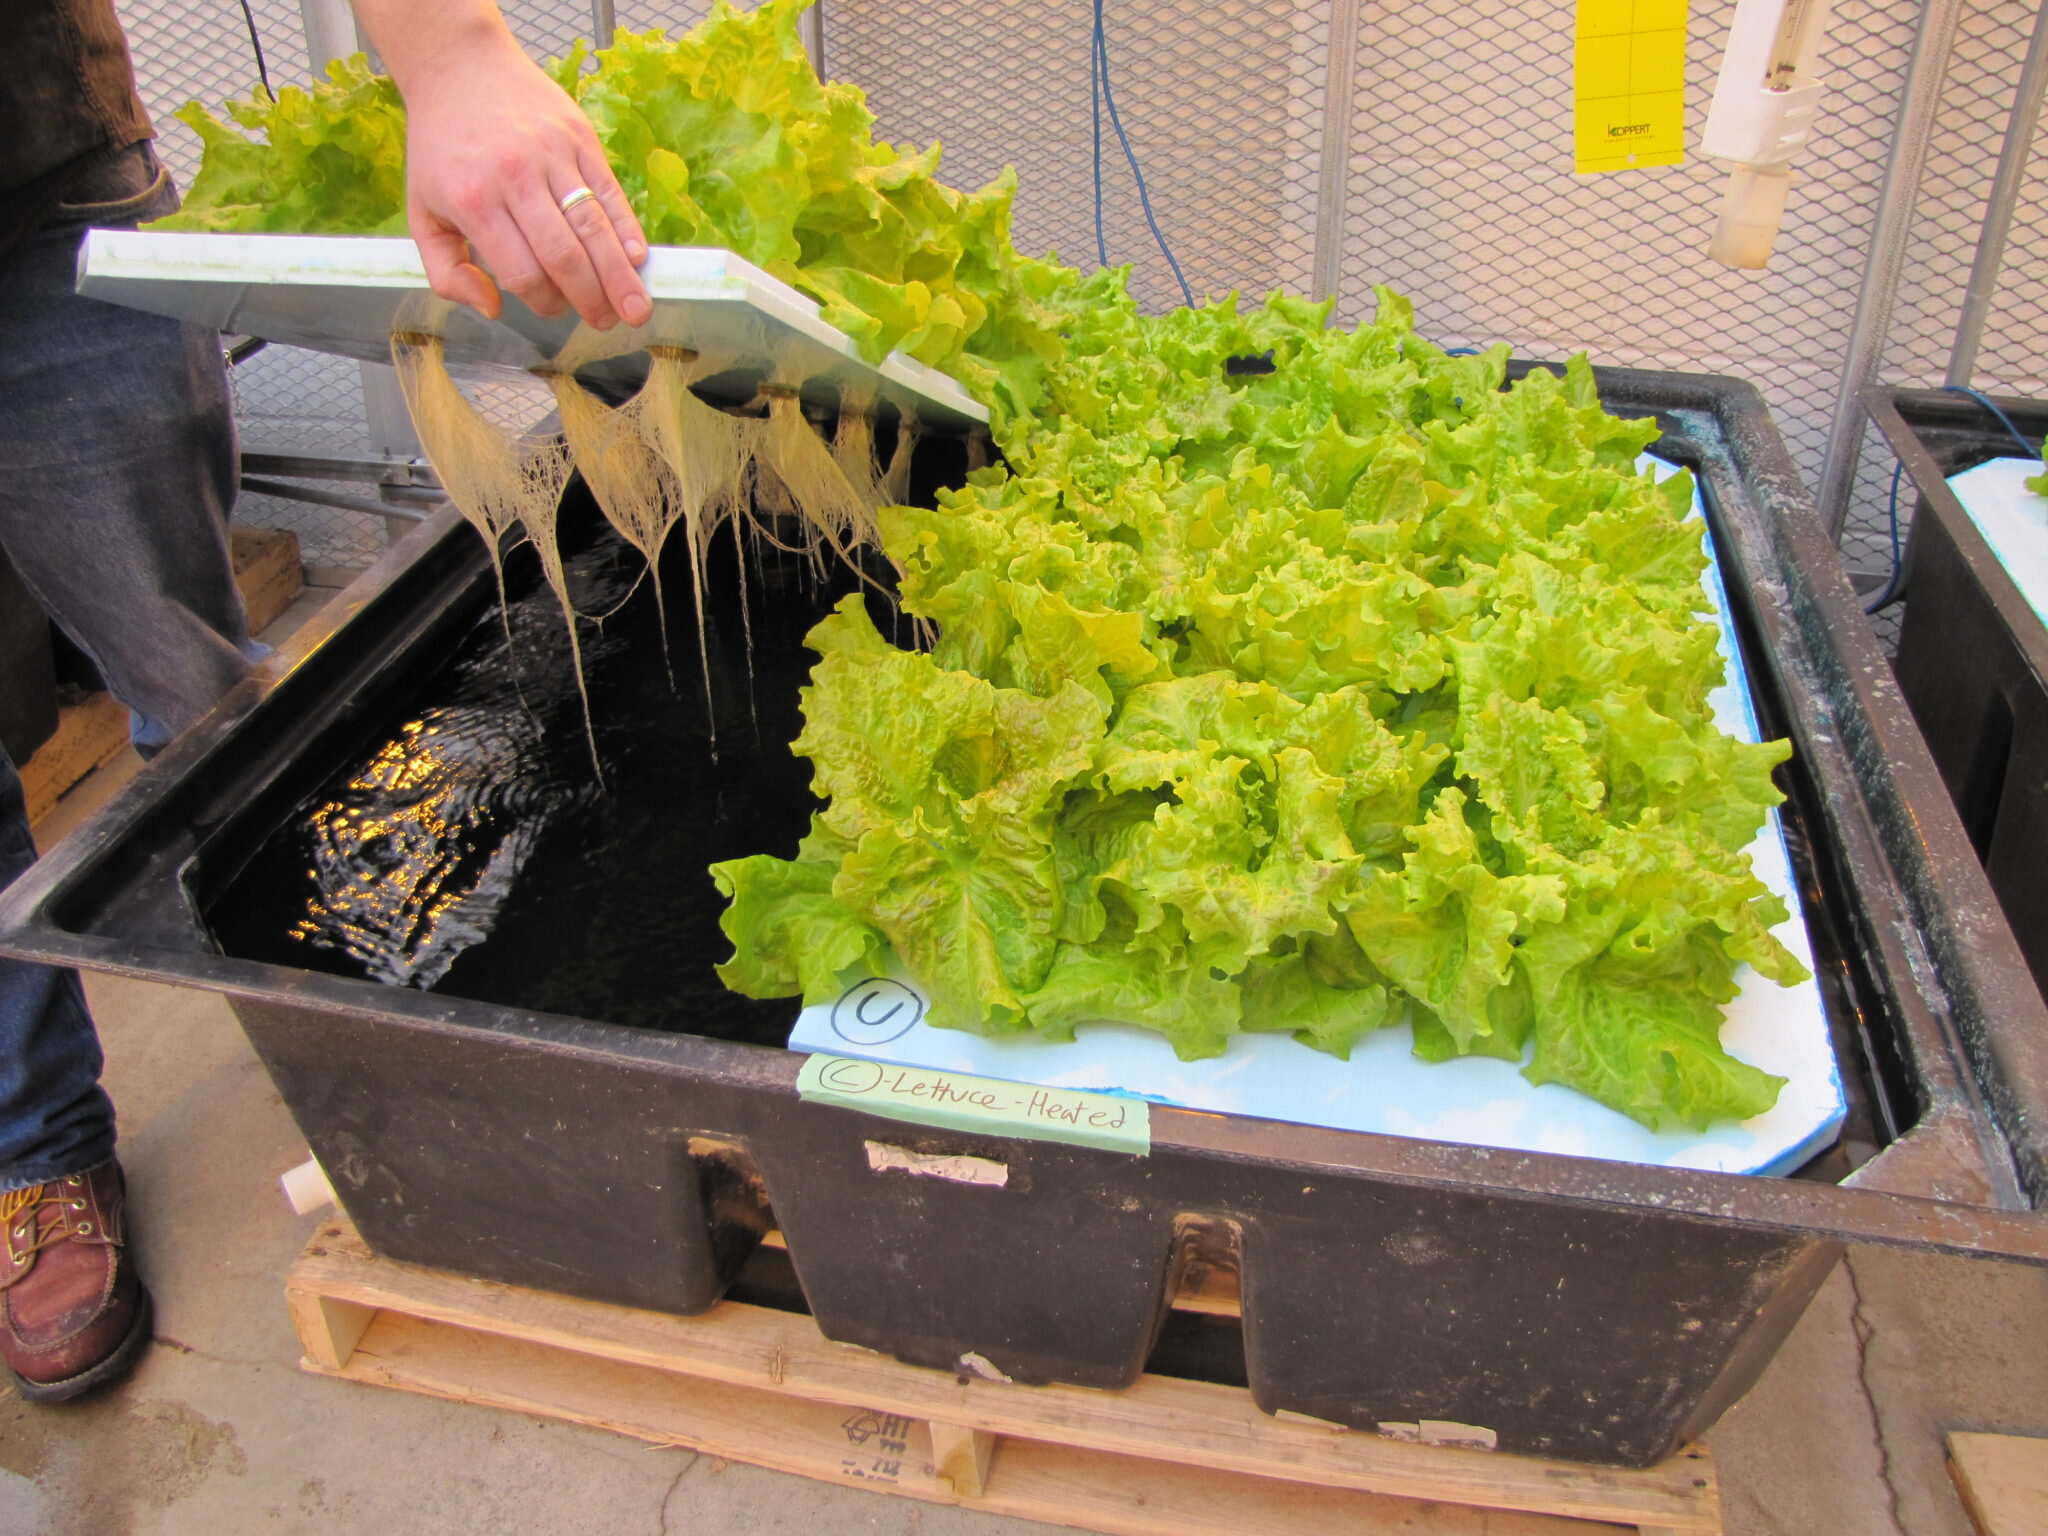 How To Get Started In Hydroponics